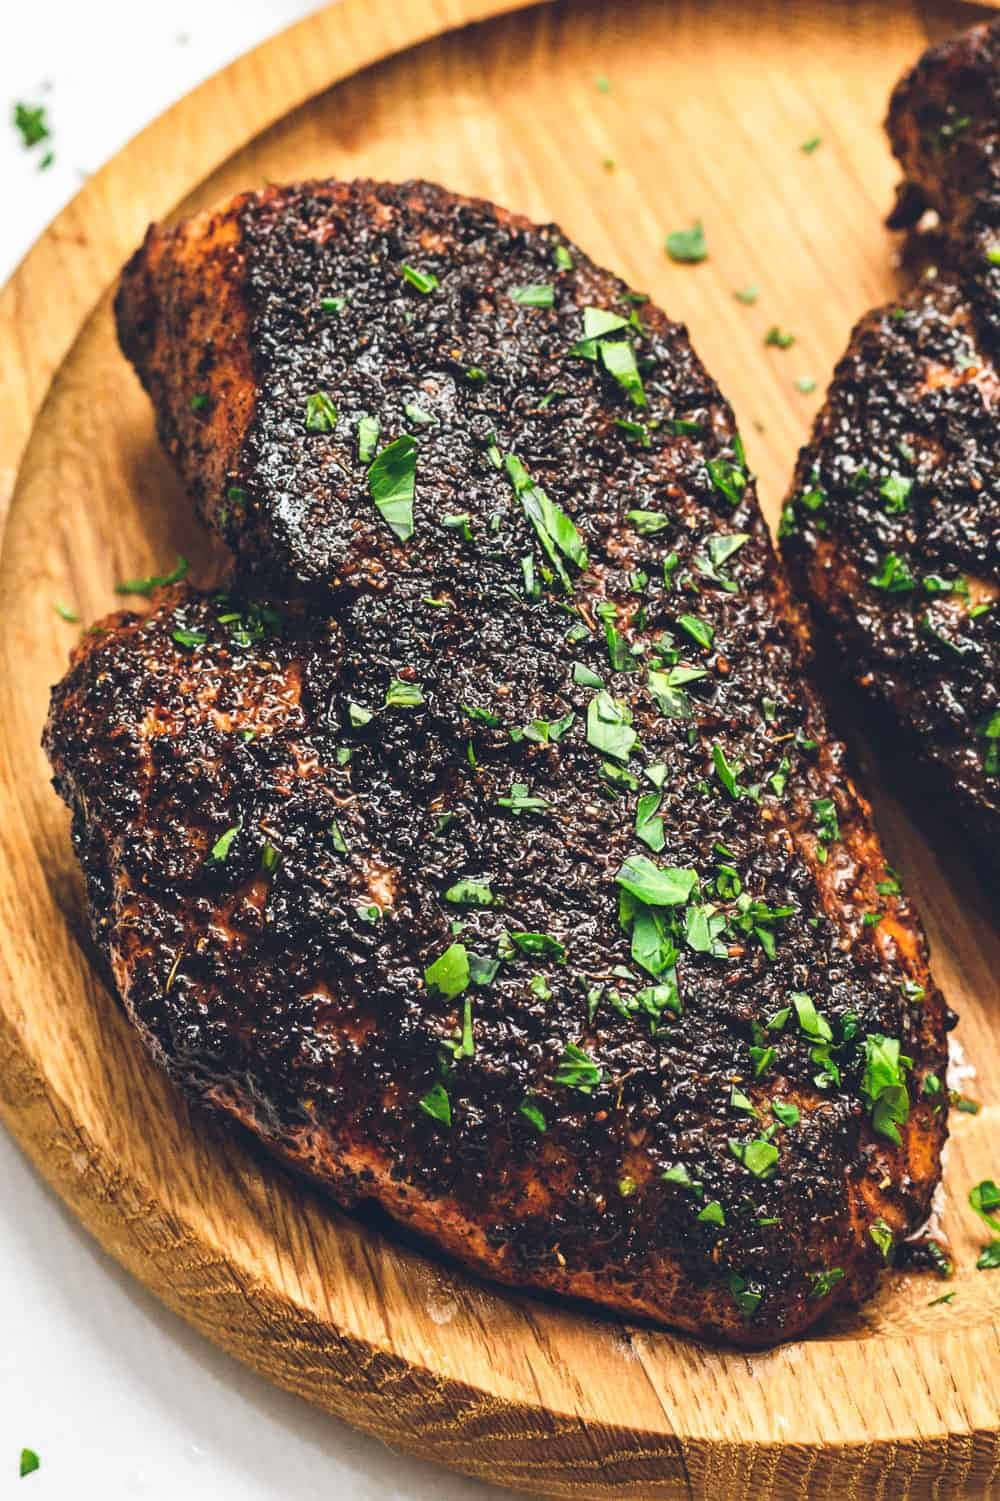 Perfectly cook blackened chicken to a golden crisp Wallpaper